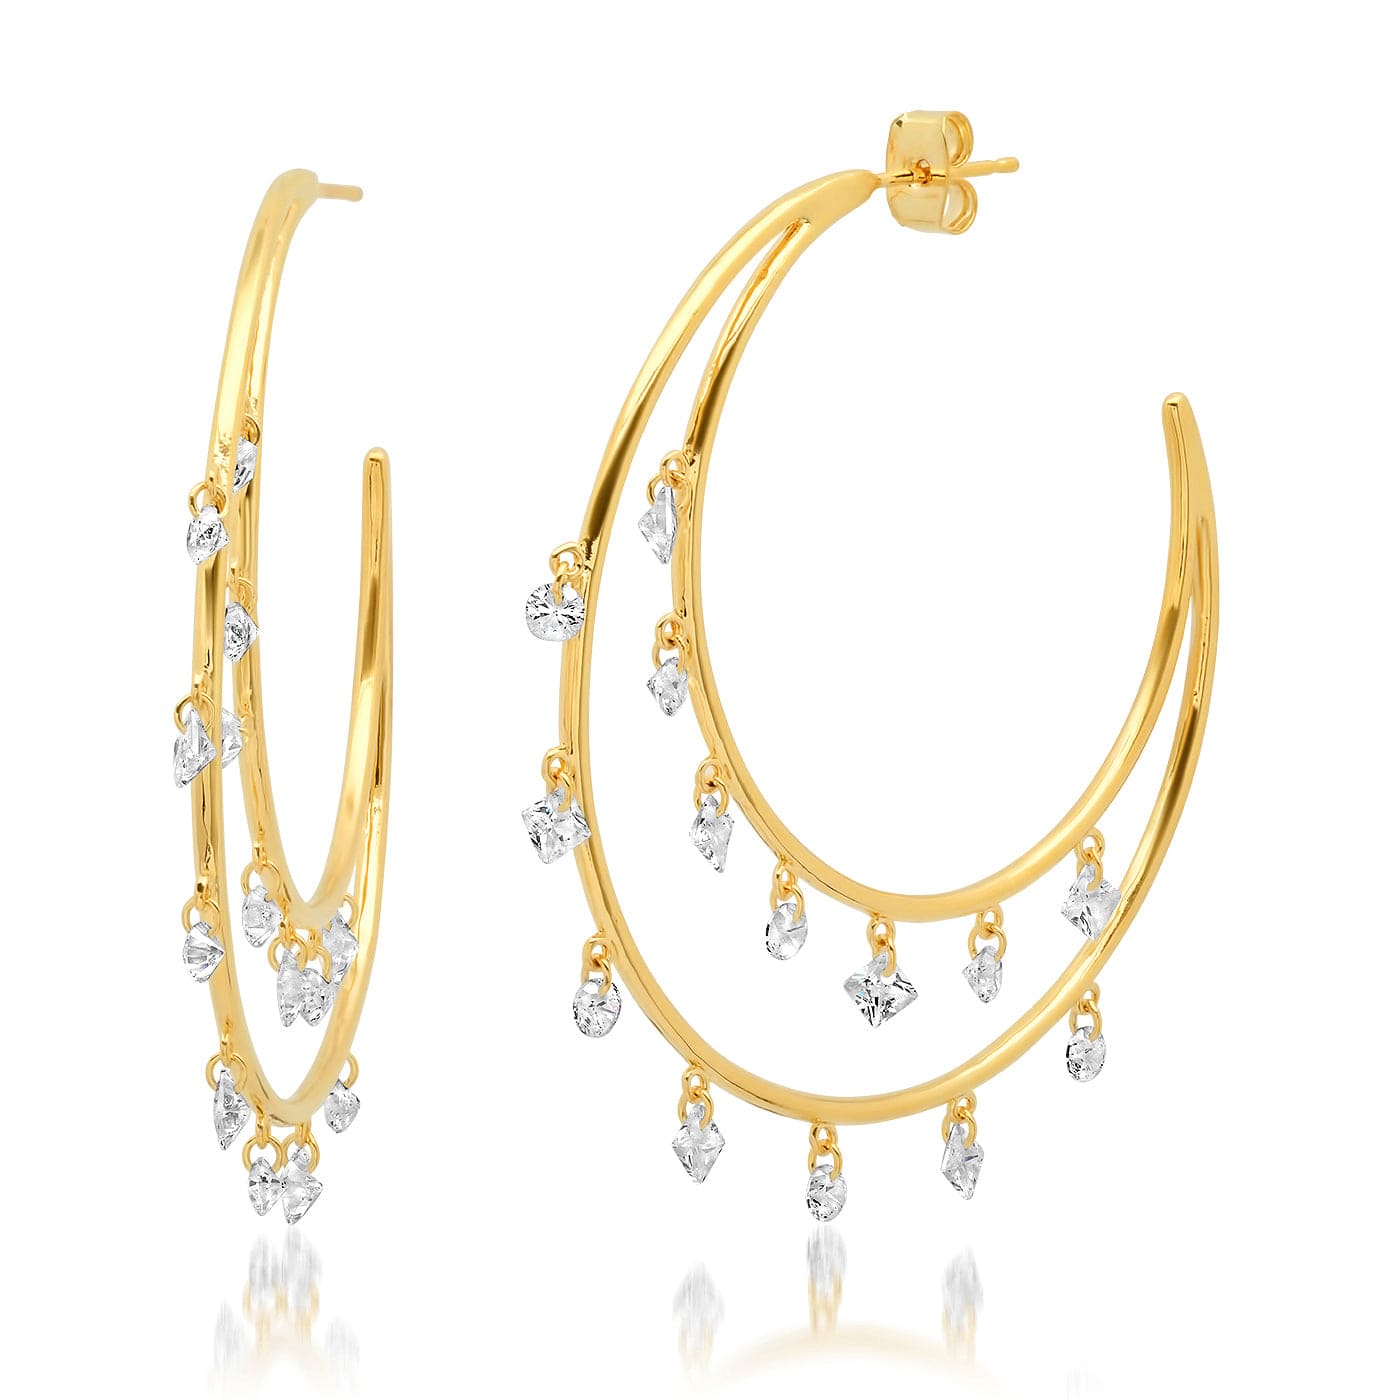 TAI JEWELRY Earrings Double Crescent Hoops With Cz Dangle Accents